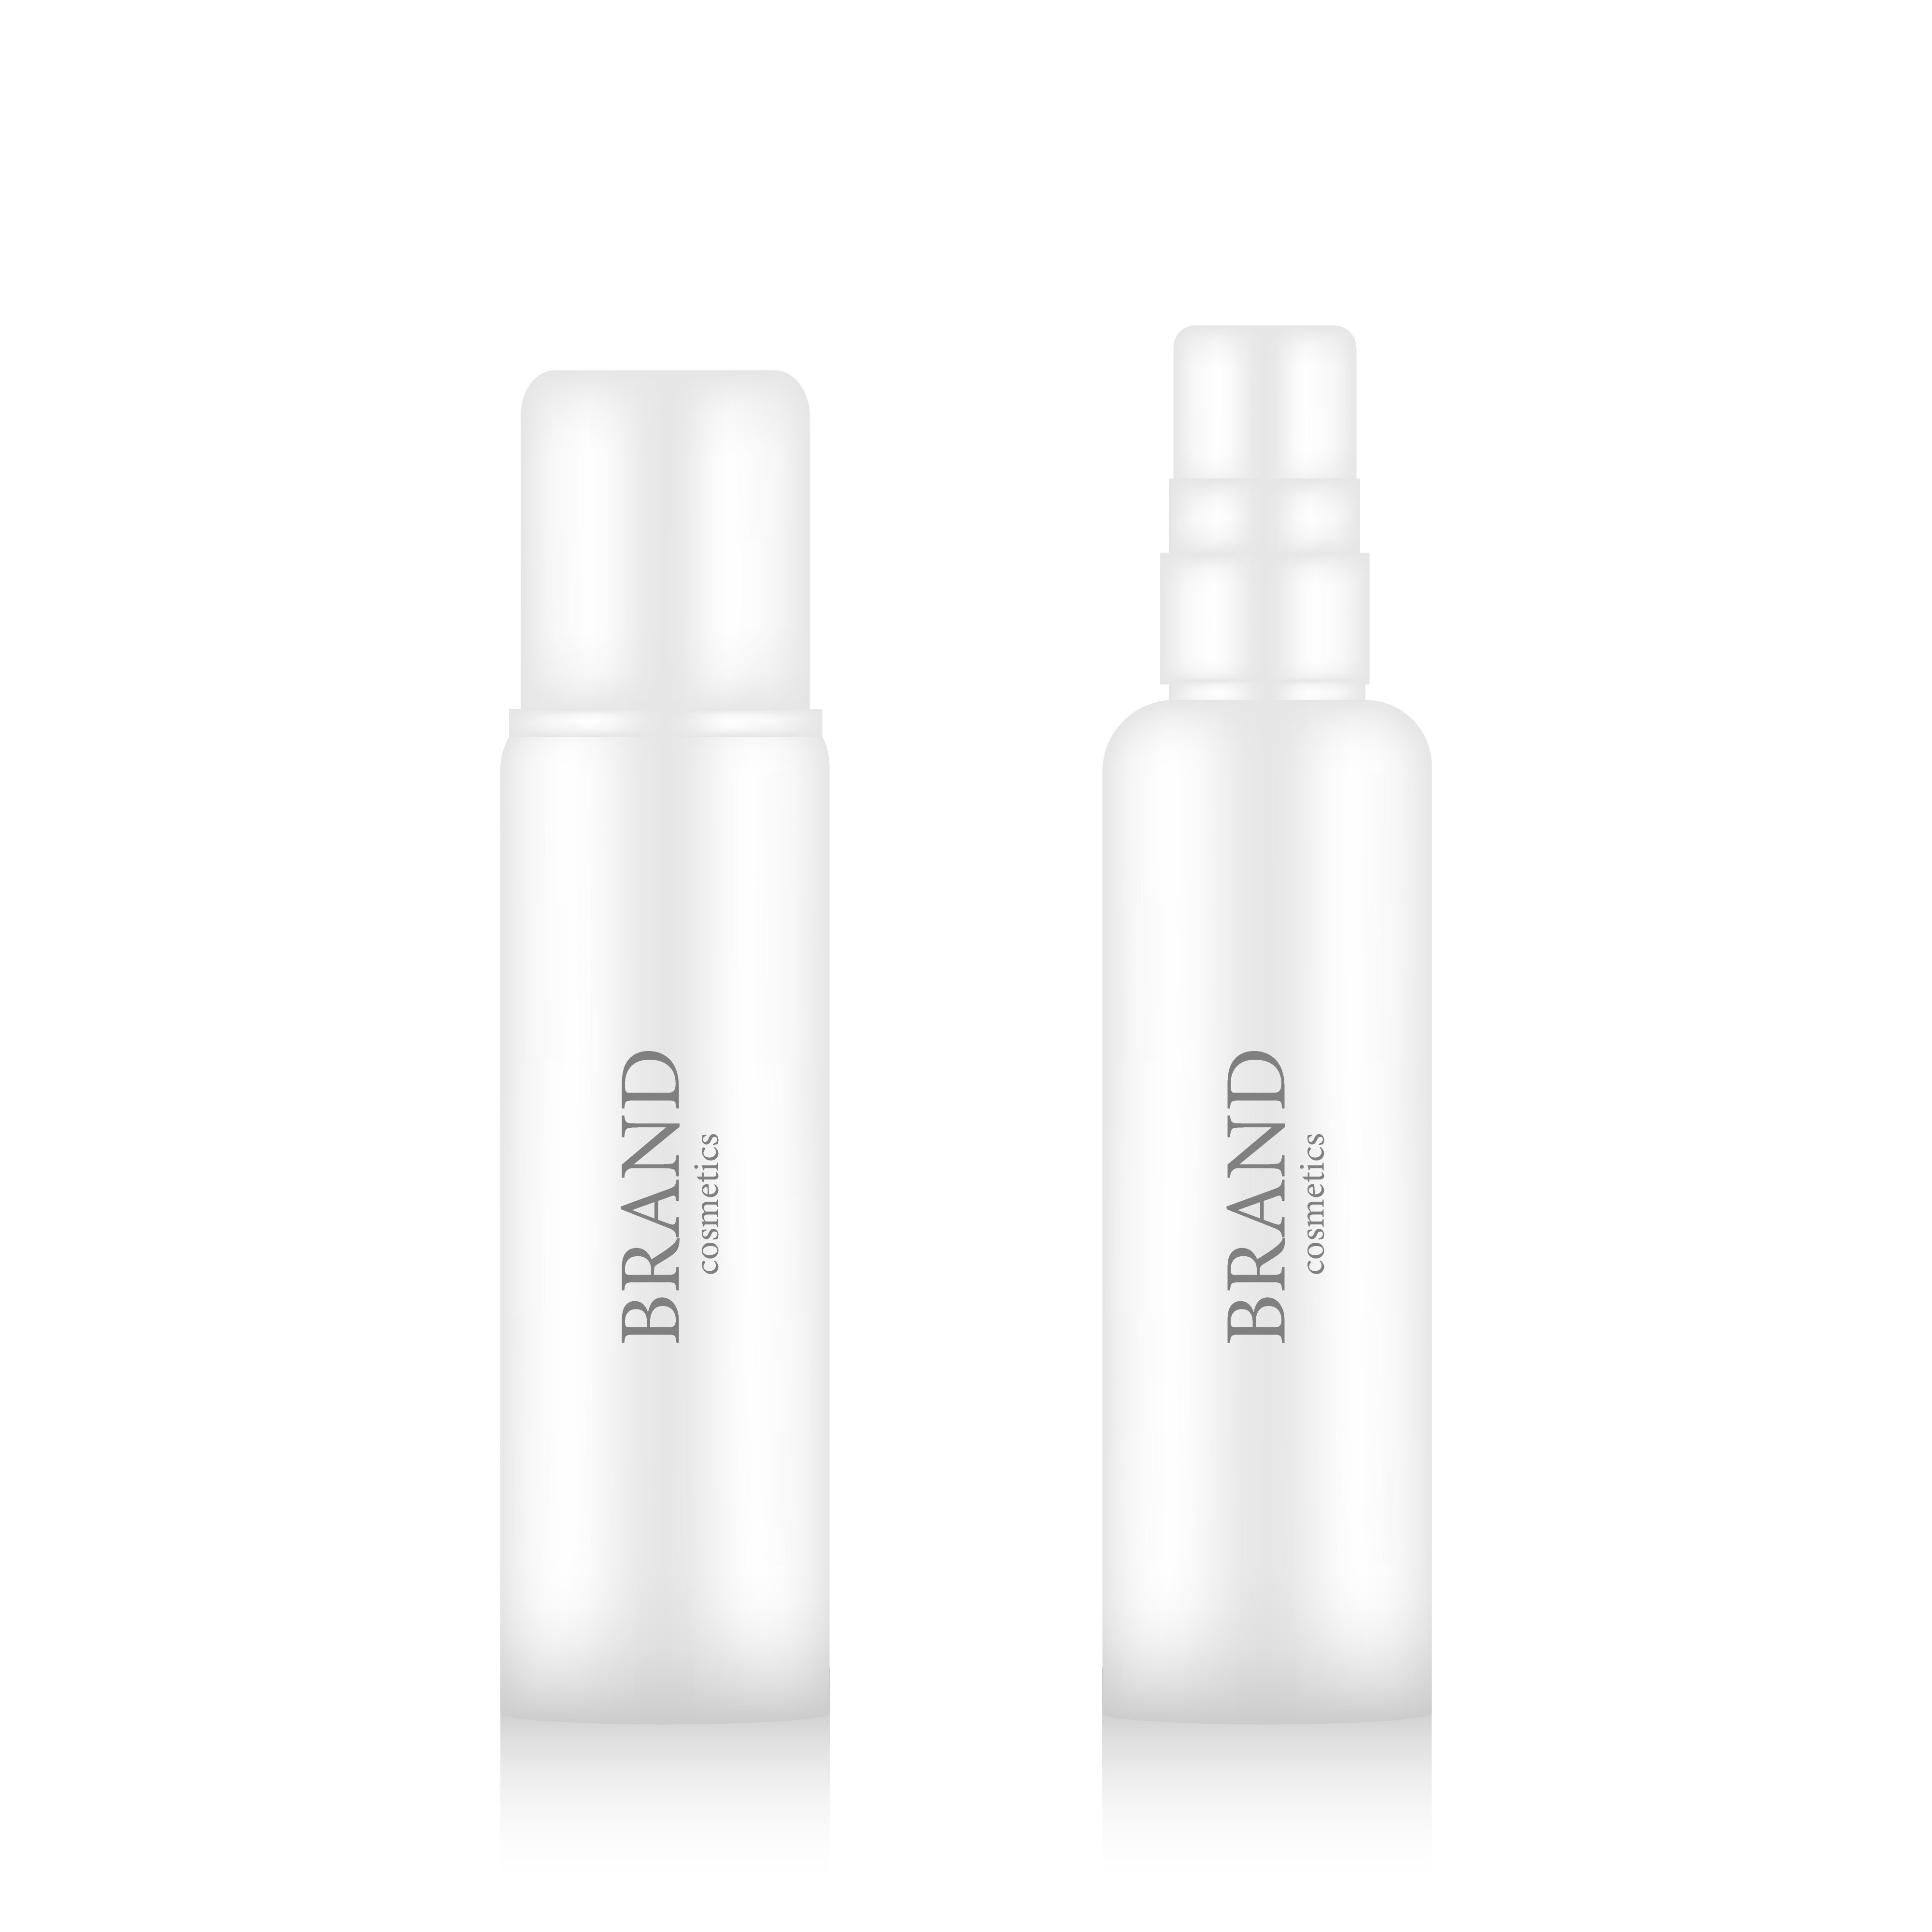 Download Realistic Brand Cosmetic Spray Bottle Mockup - Download ...